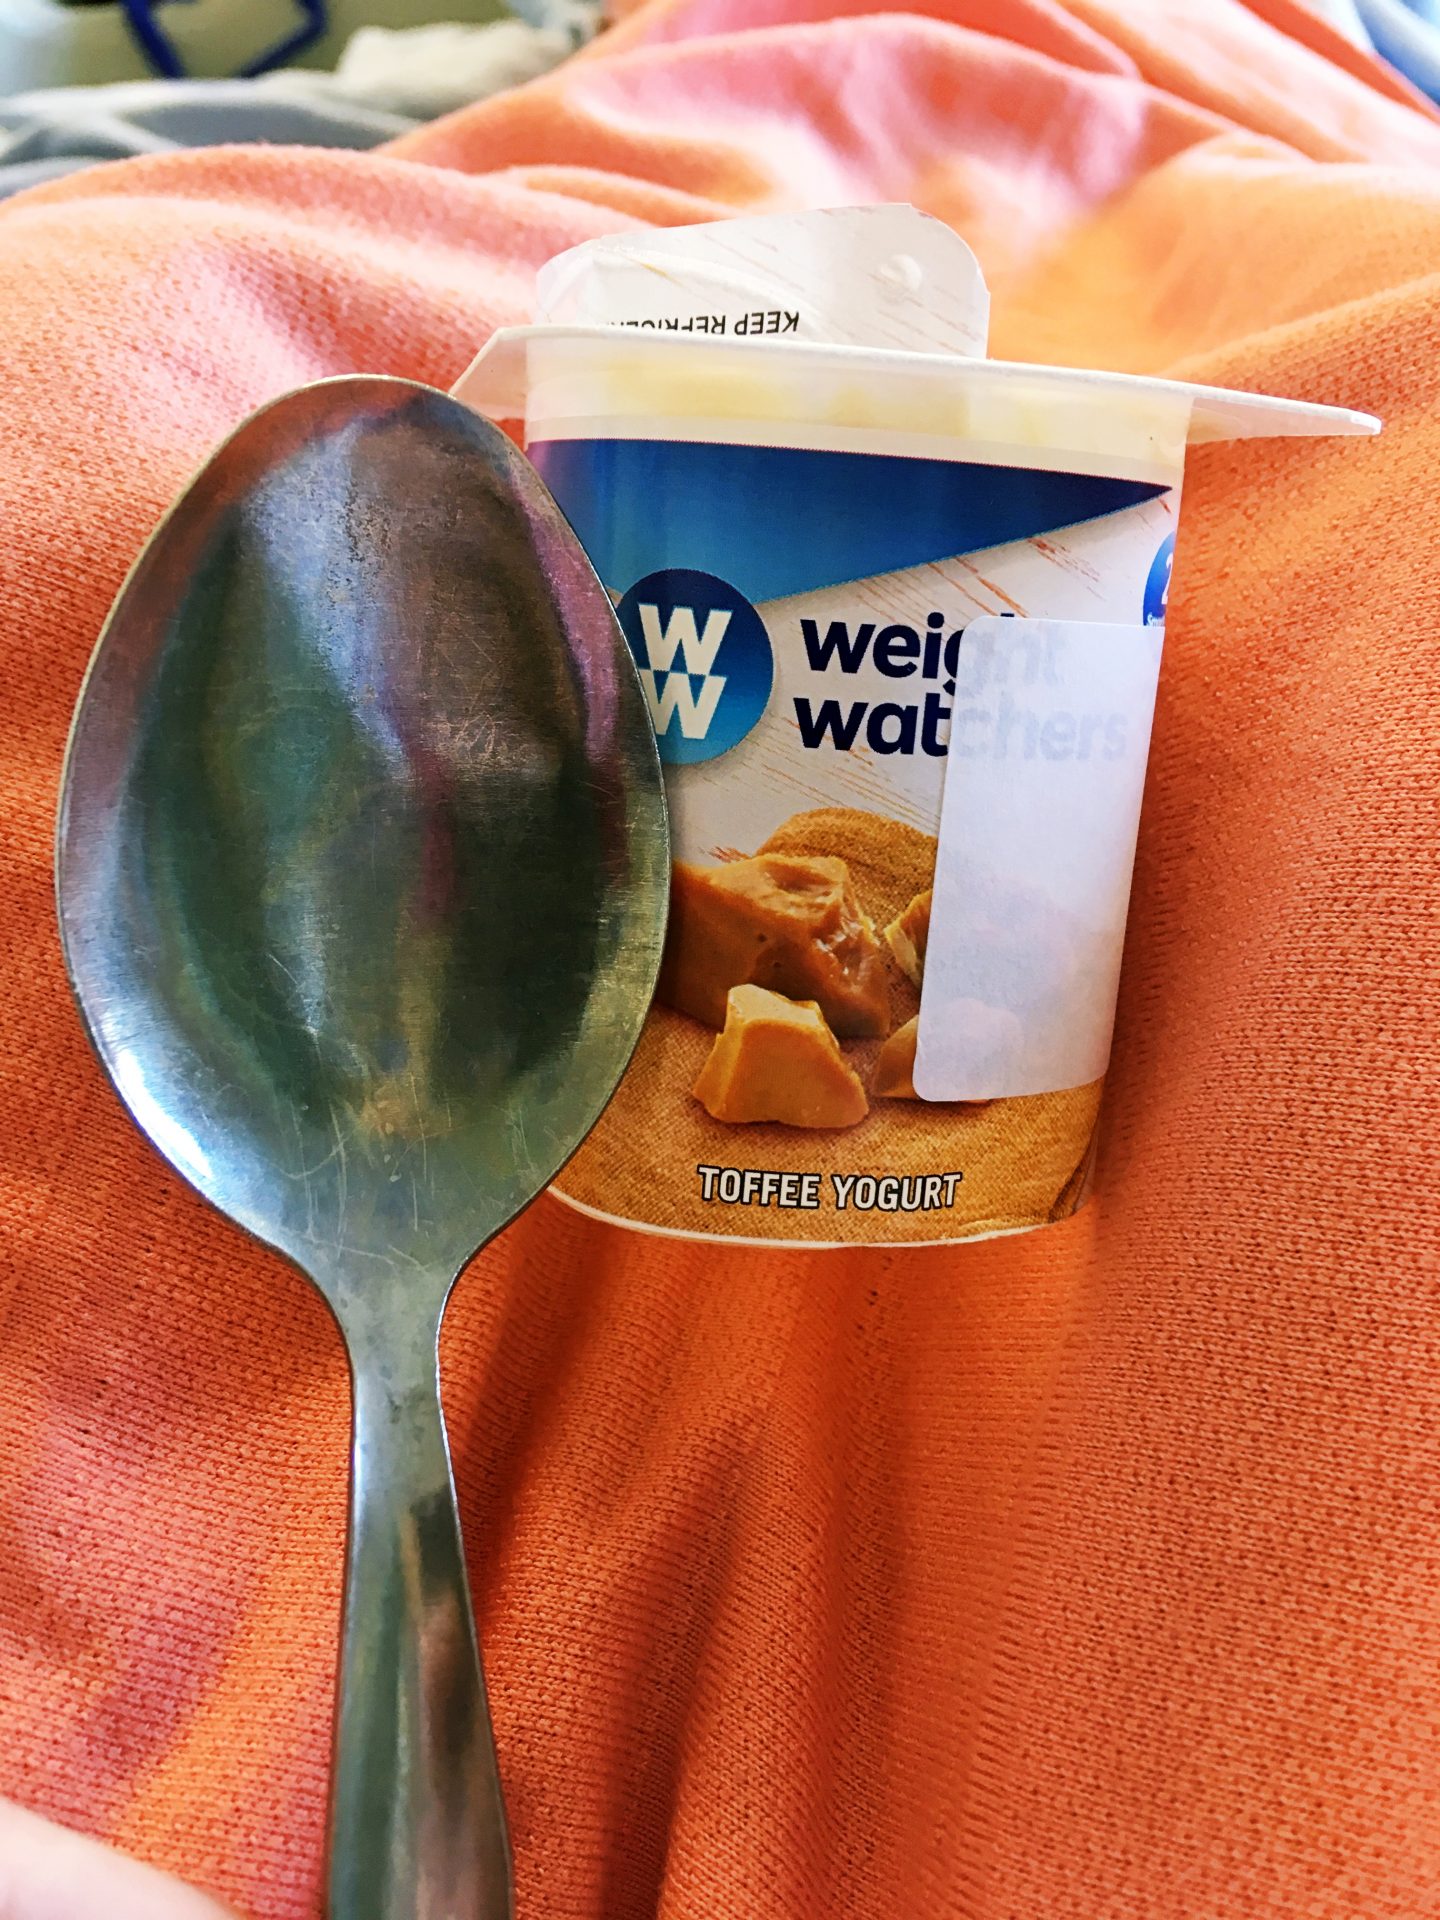 My Weight Watchers yoghurt and the hospital spoon next to it, which is bigger than the pot itself.